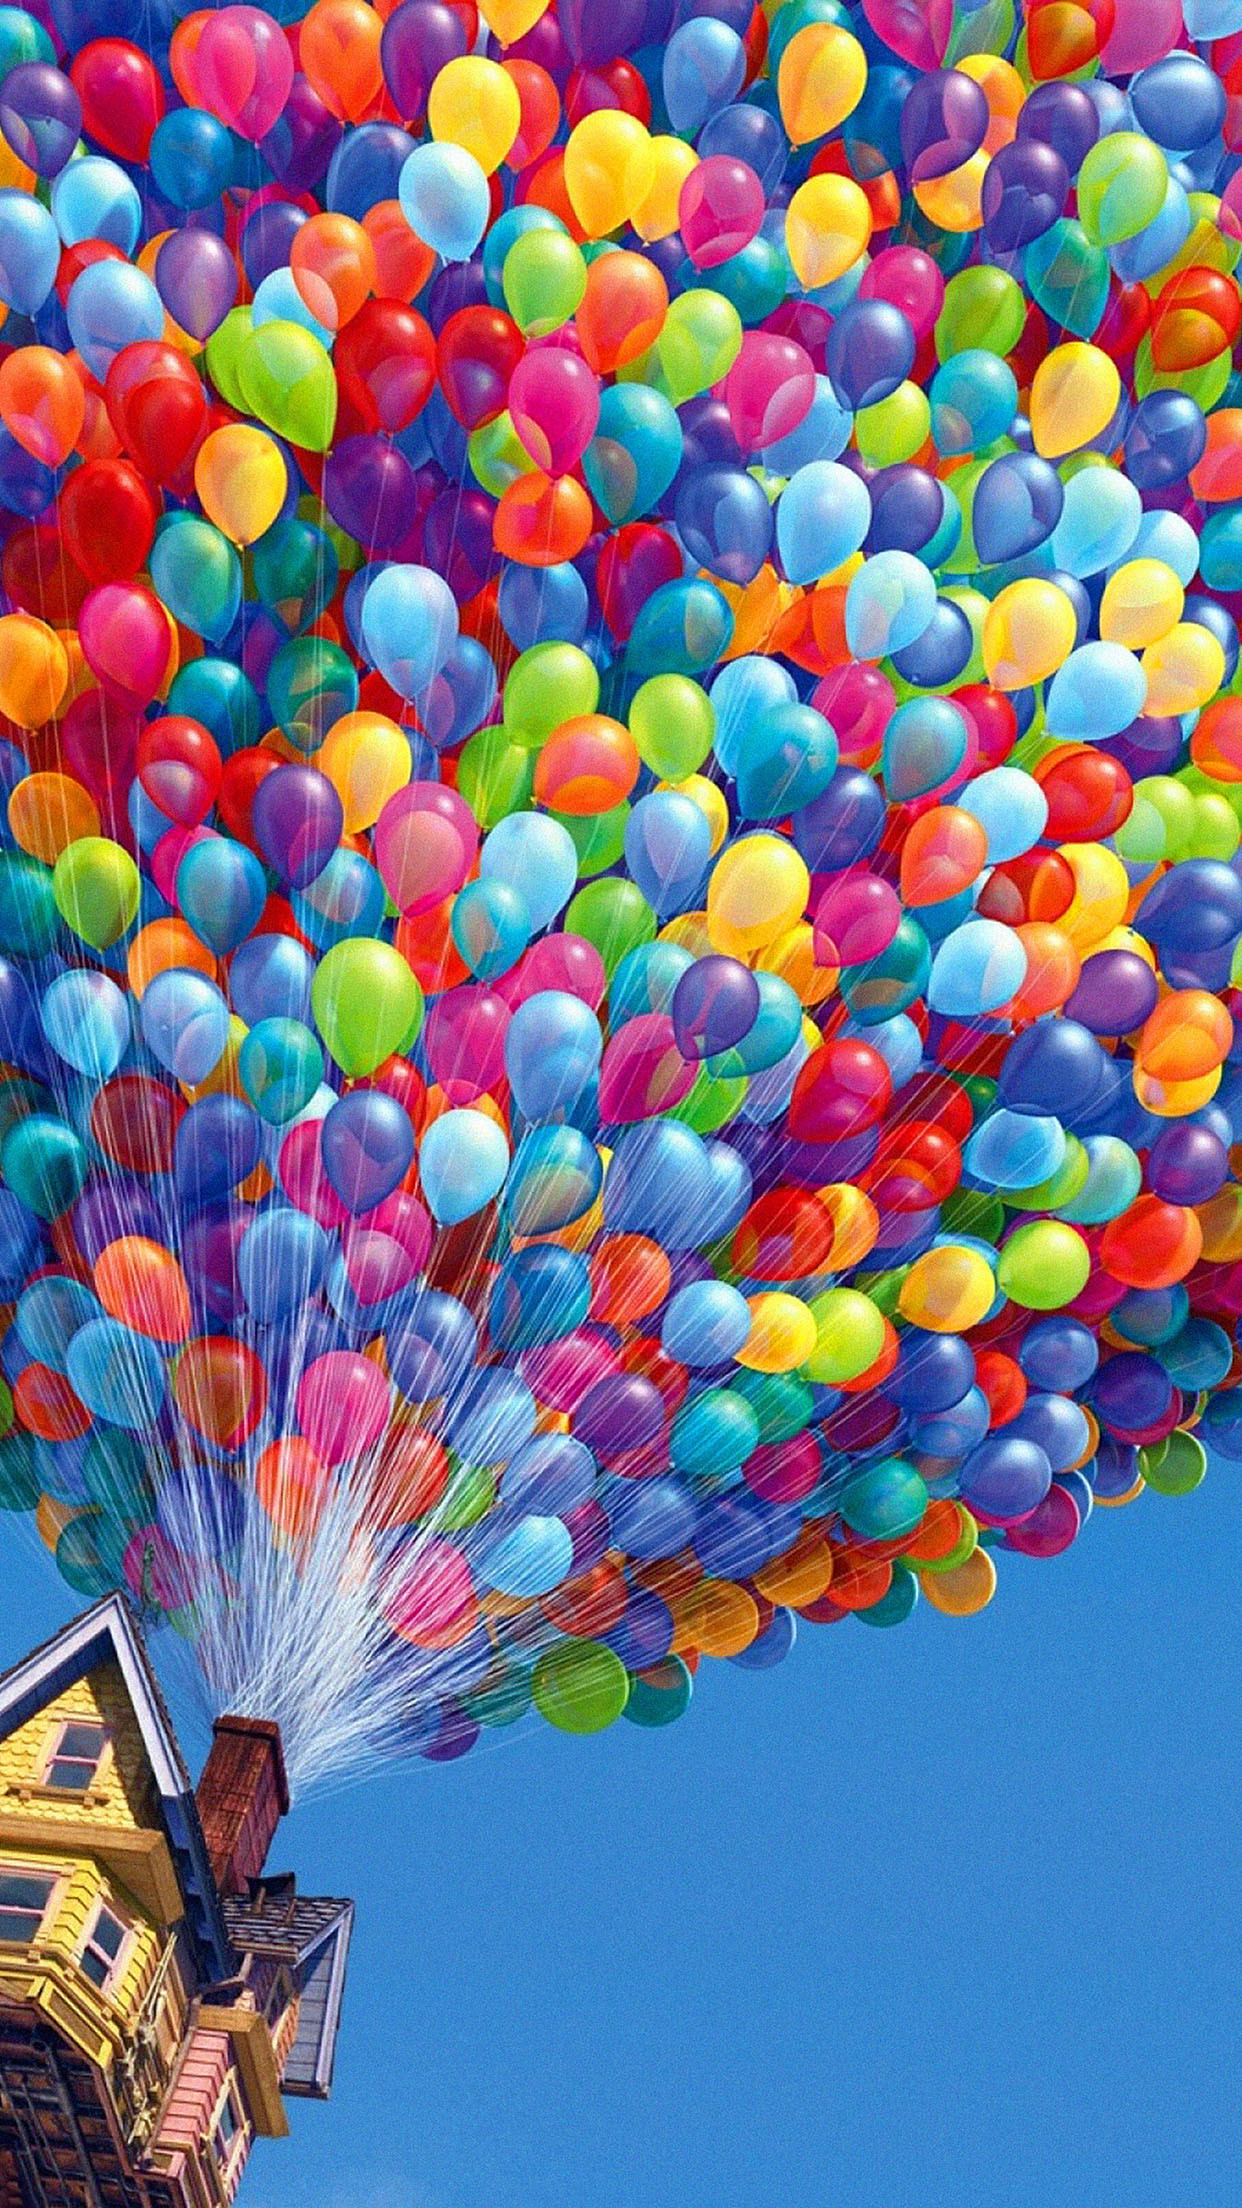 Colorful Balloons House Up Movie Android Wallpaper free download